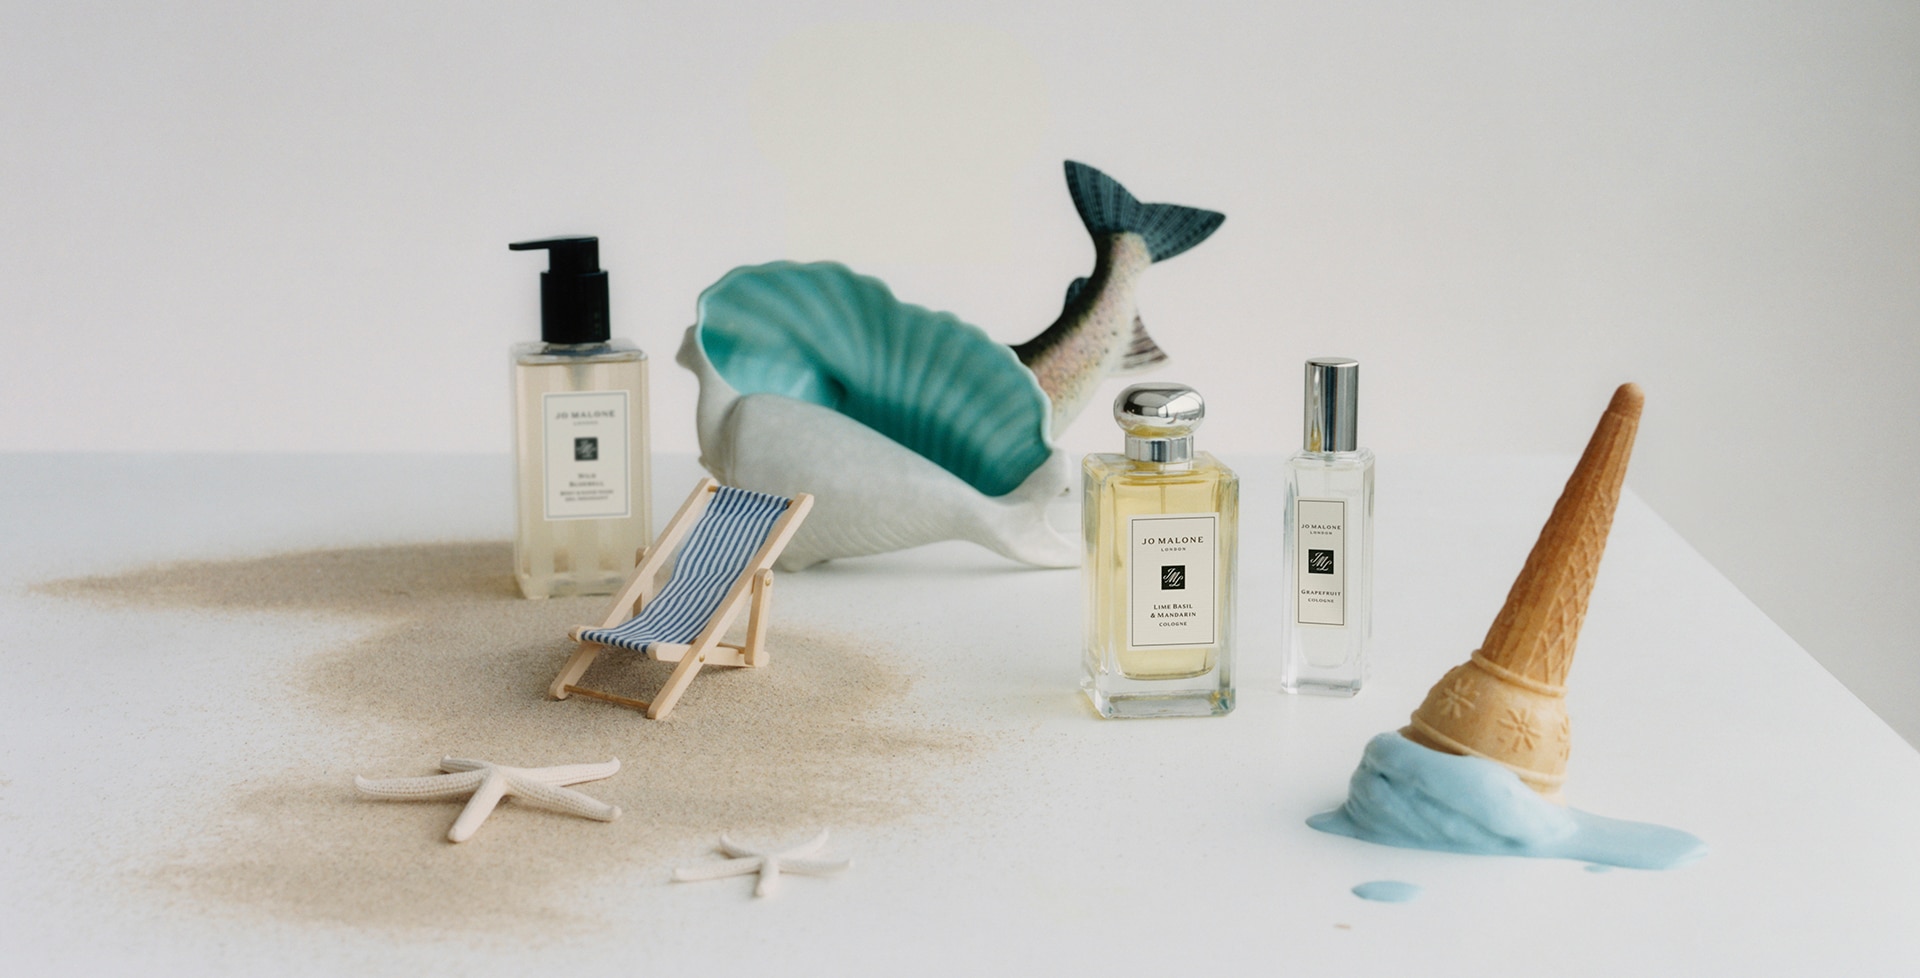 Jo Malone London Colognes and Wash with big shell, beach ornaments and sand 